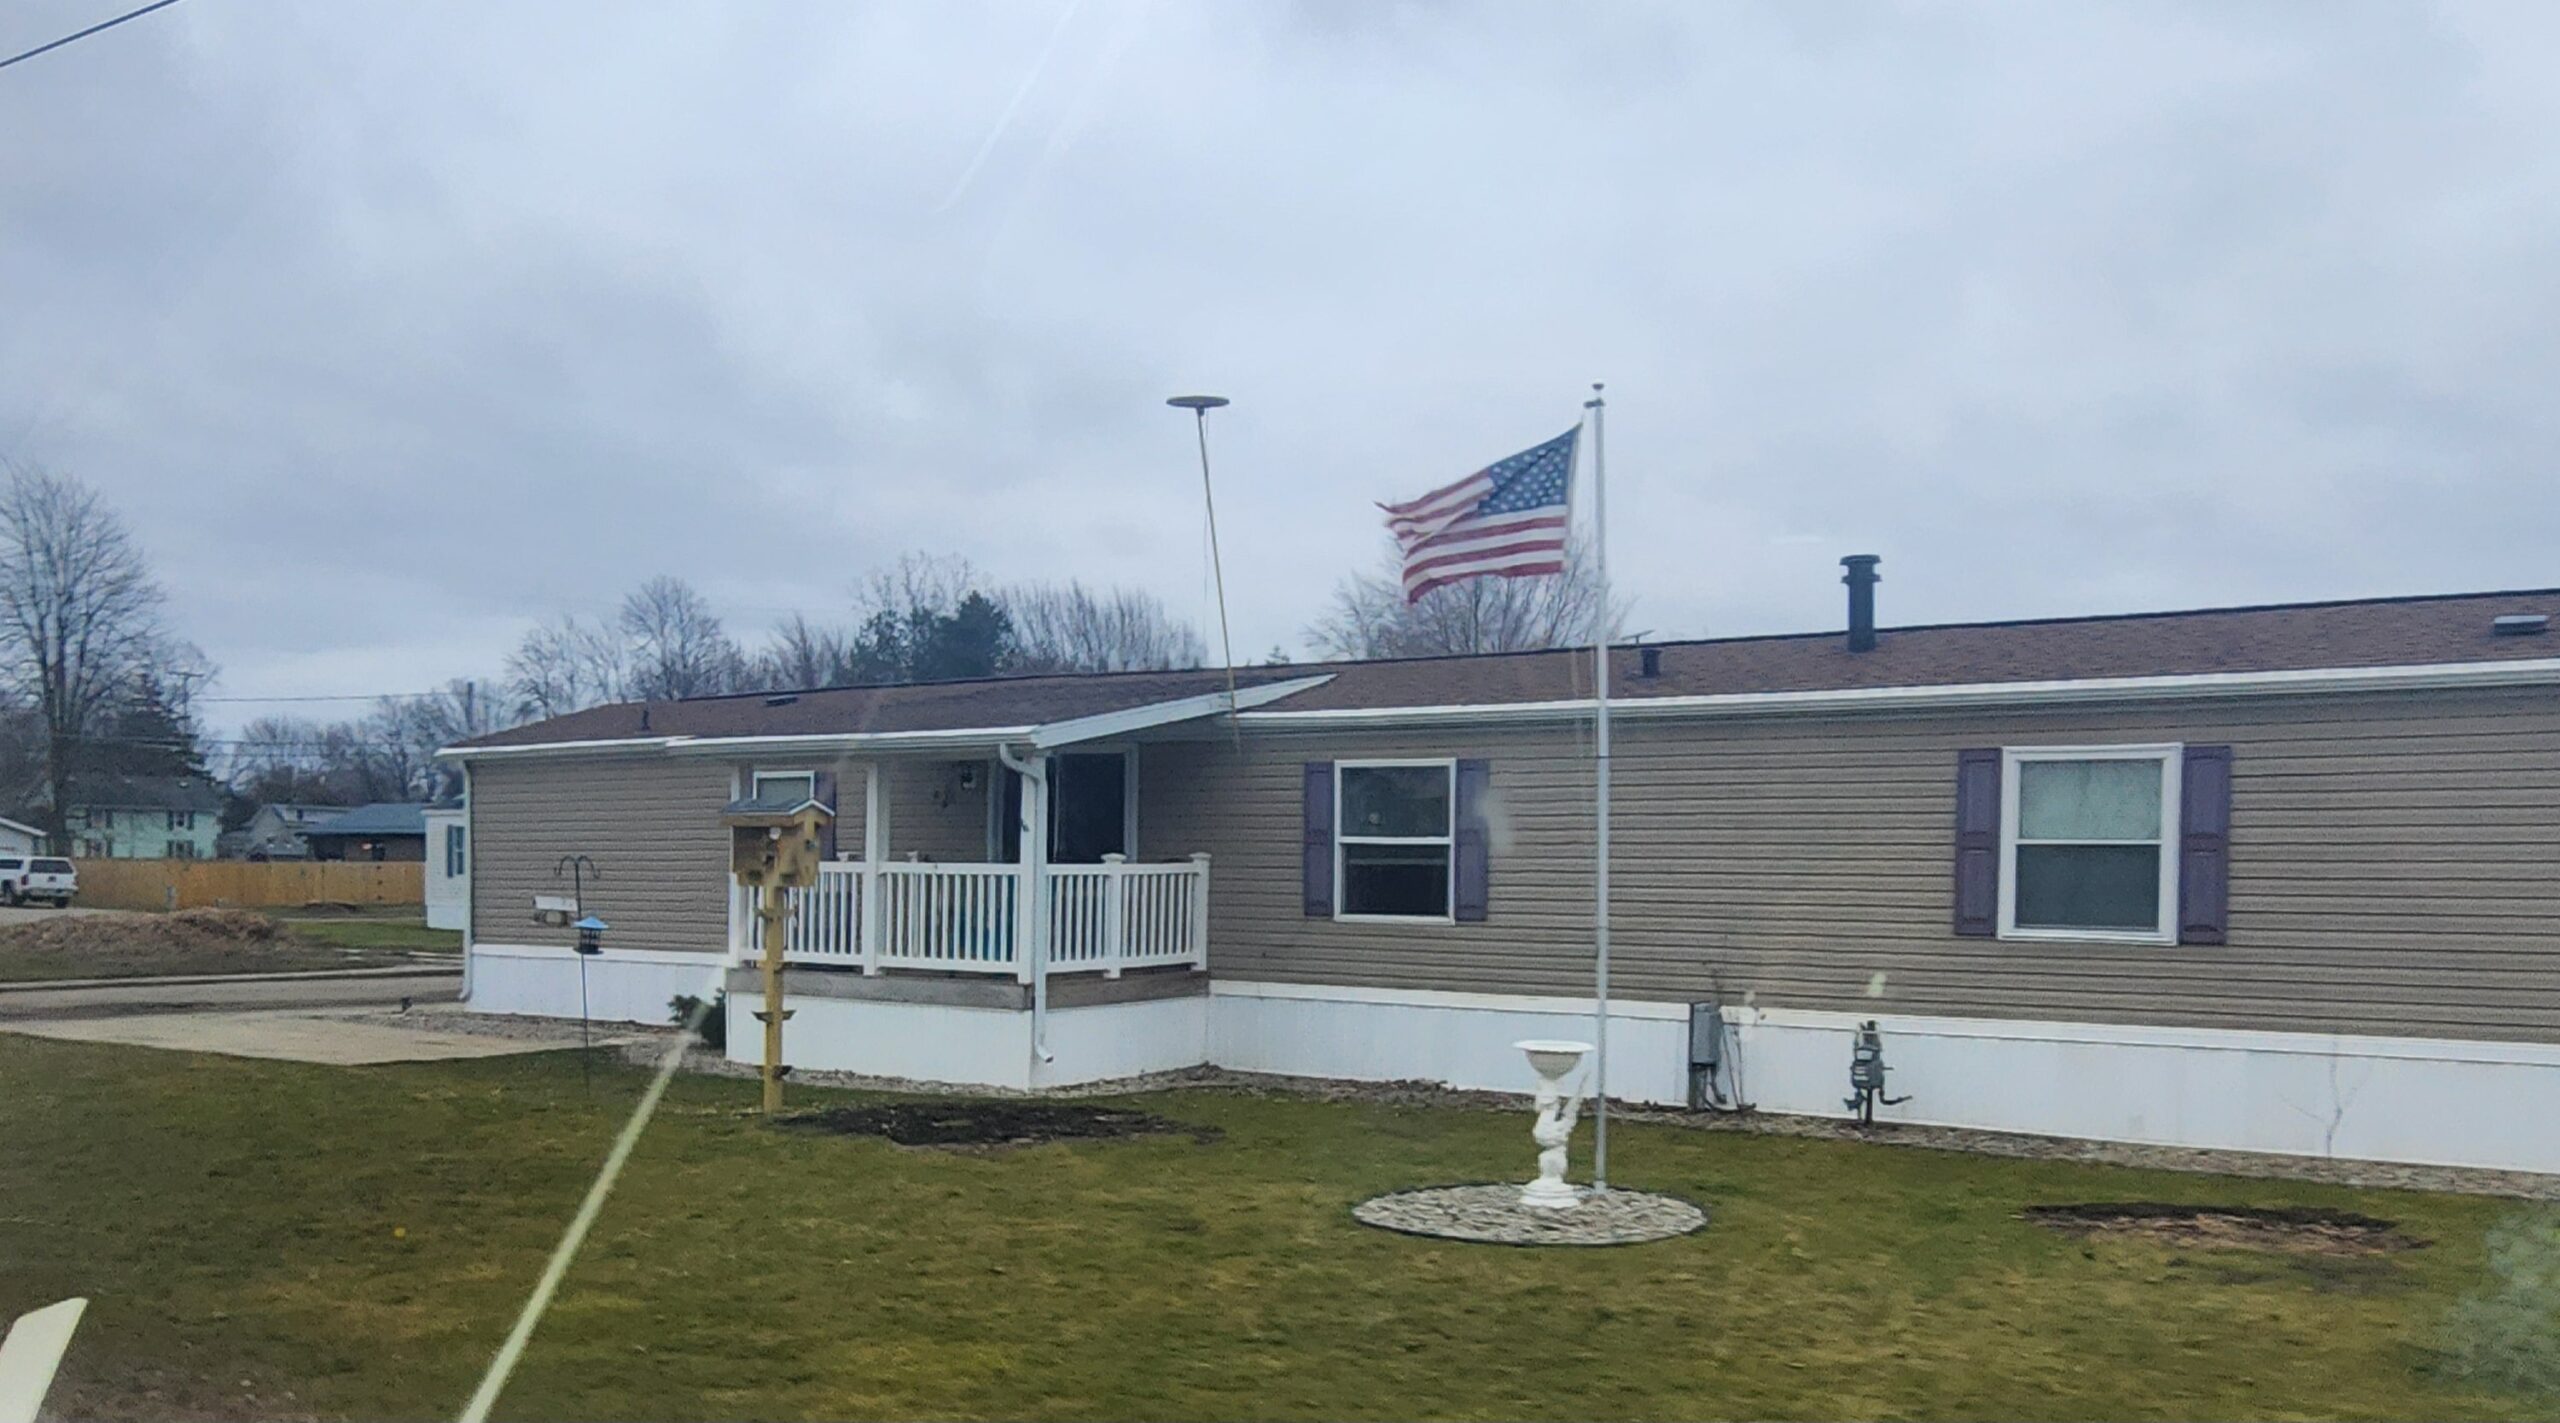 A singlewide with an American flag out front